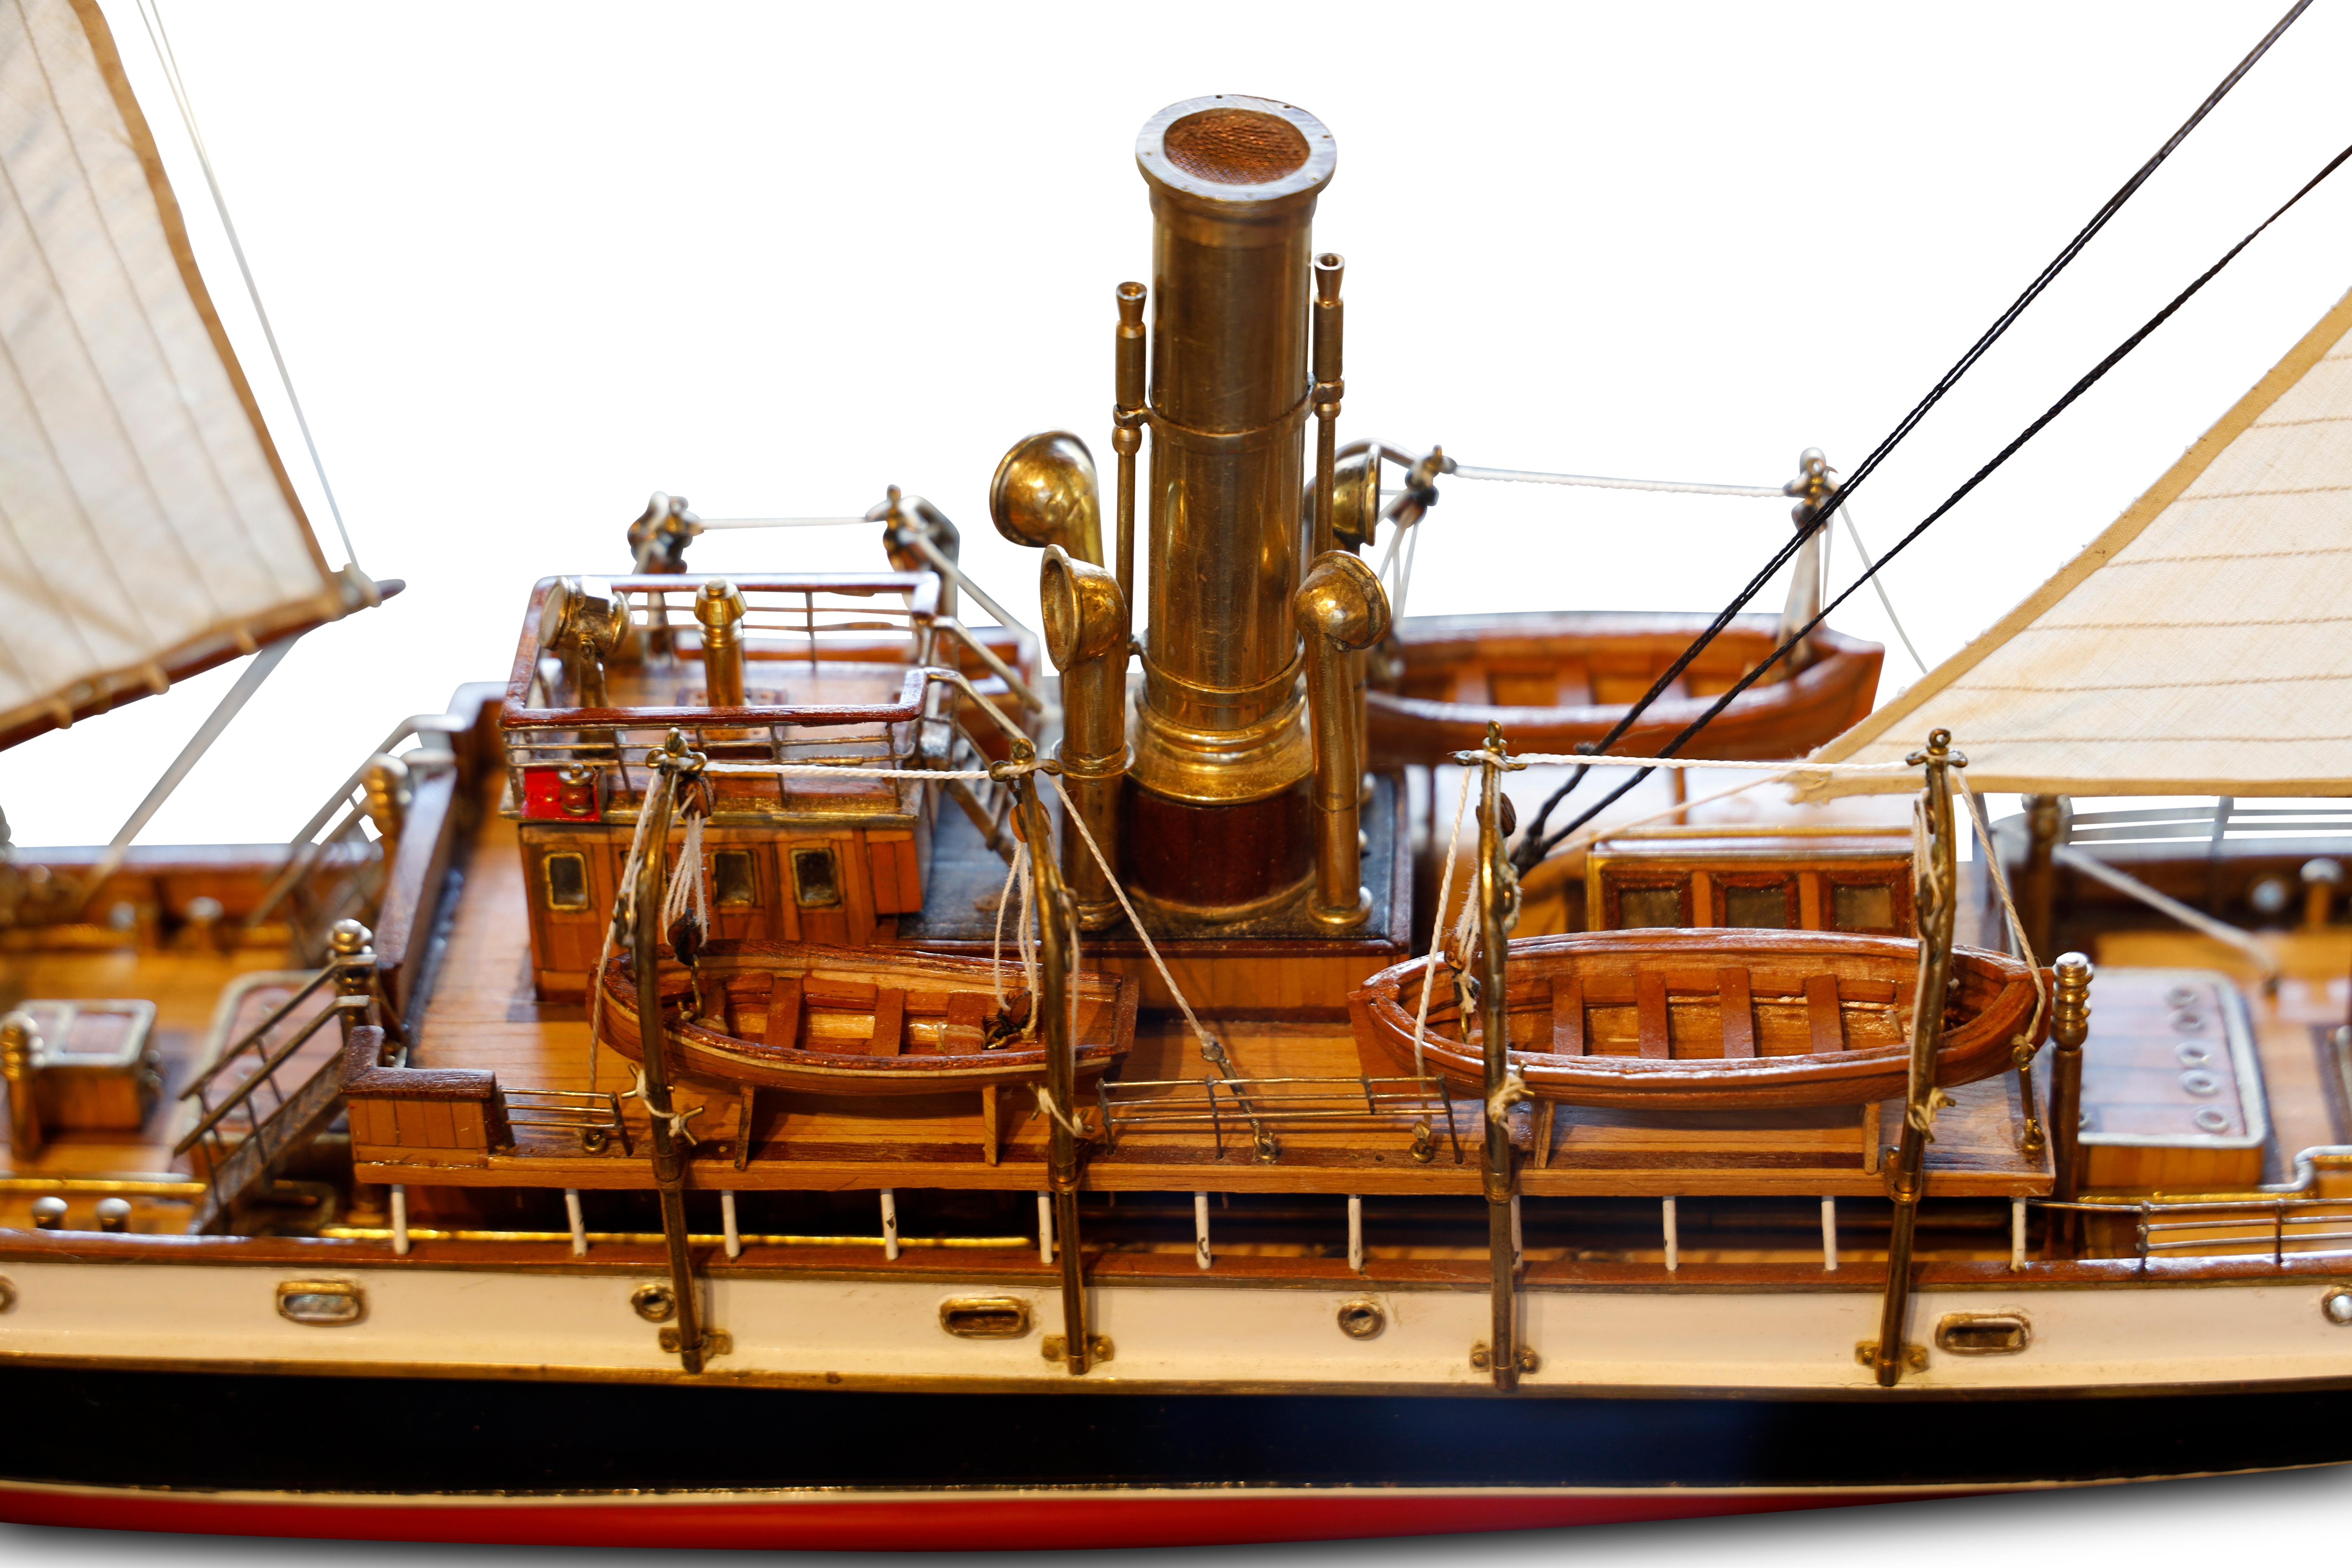 Model of an Imperial Russian harbor patrol ship, Commander Bering (1905) modeled by G. Cheikhet. Carved and painted hull with brass strap-work, planked decks outfitted with detailed polished brass and wood fittings, including anchors with chains and